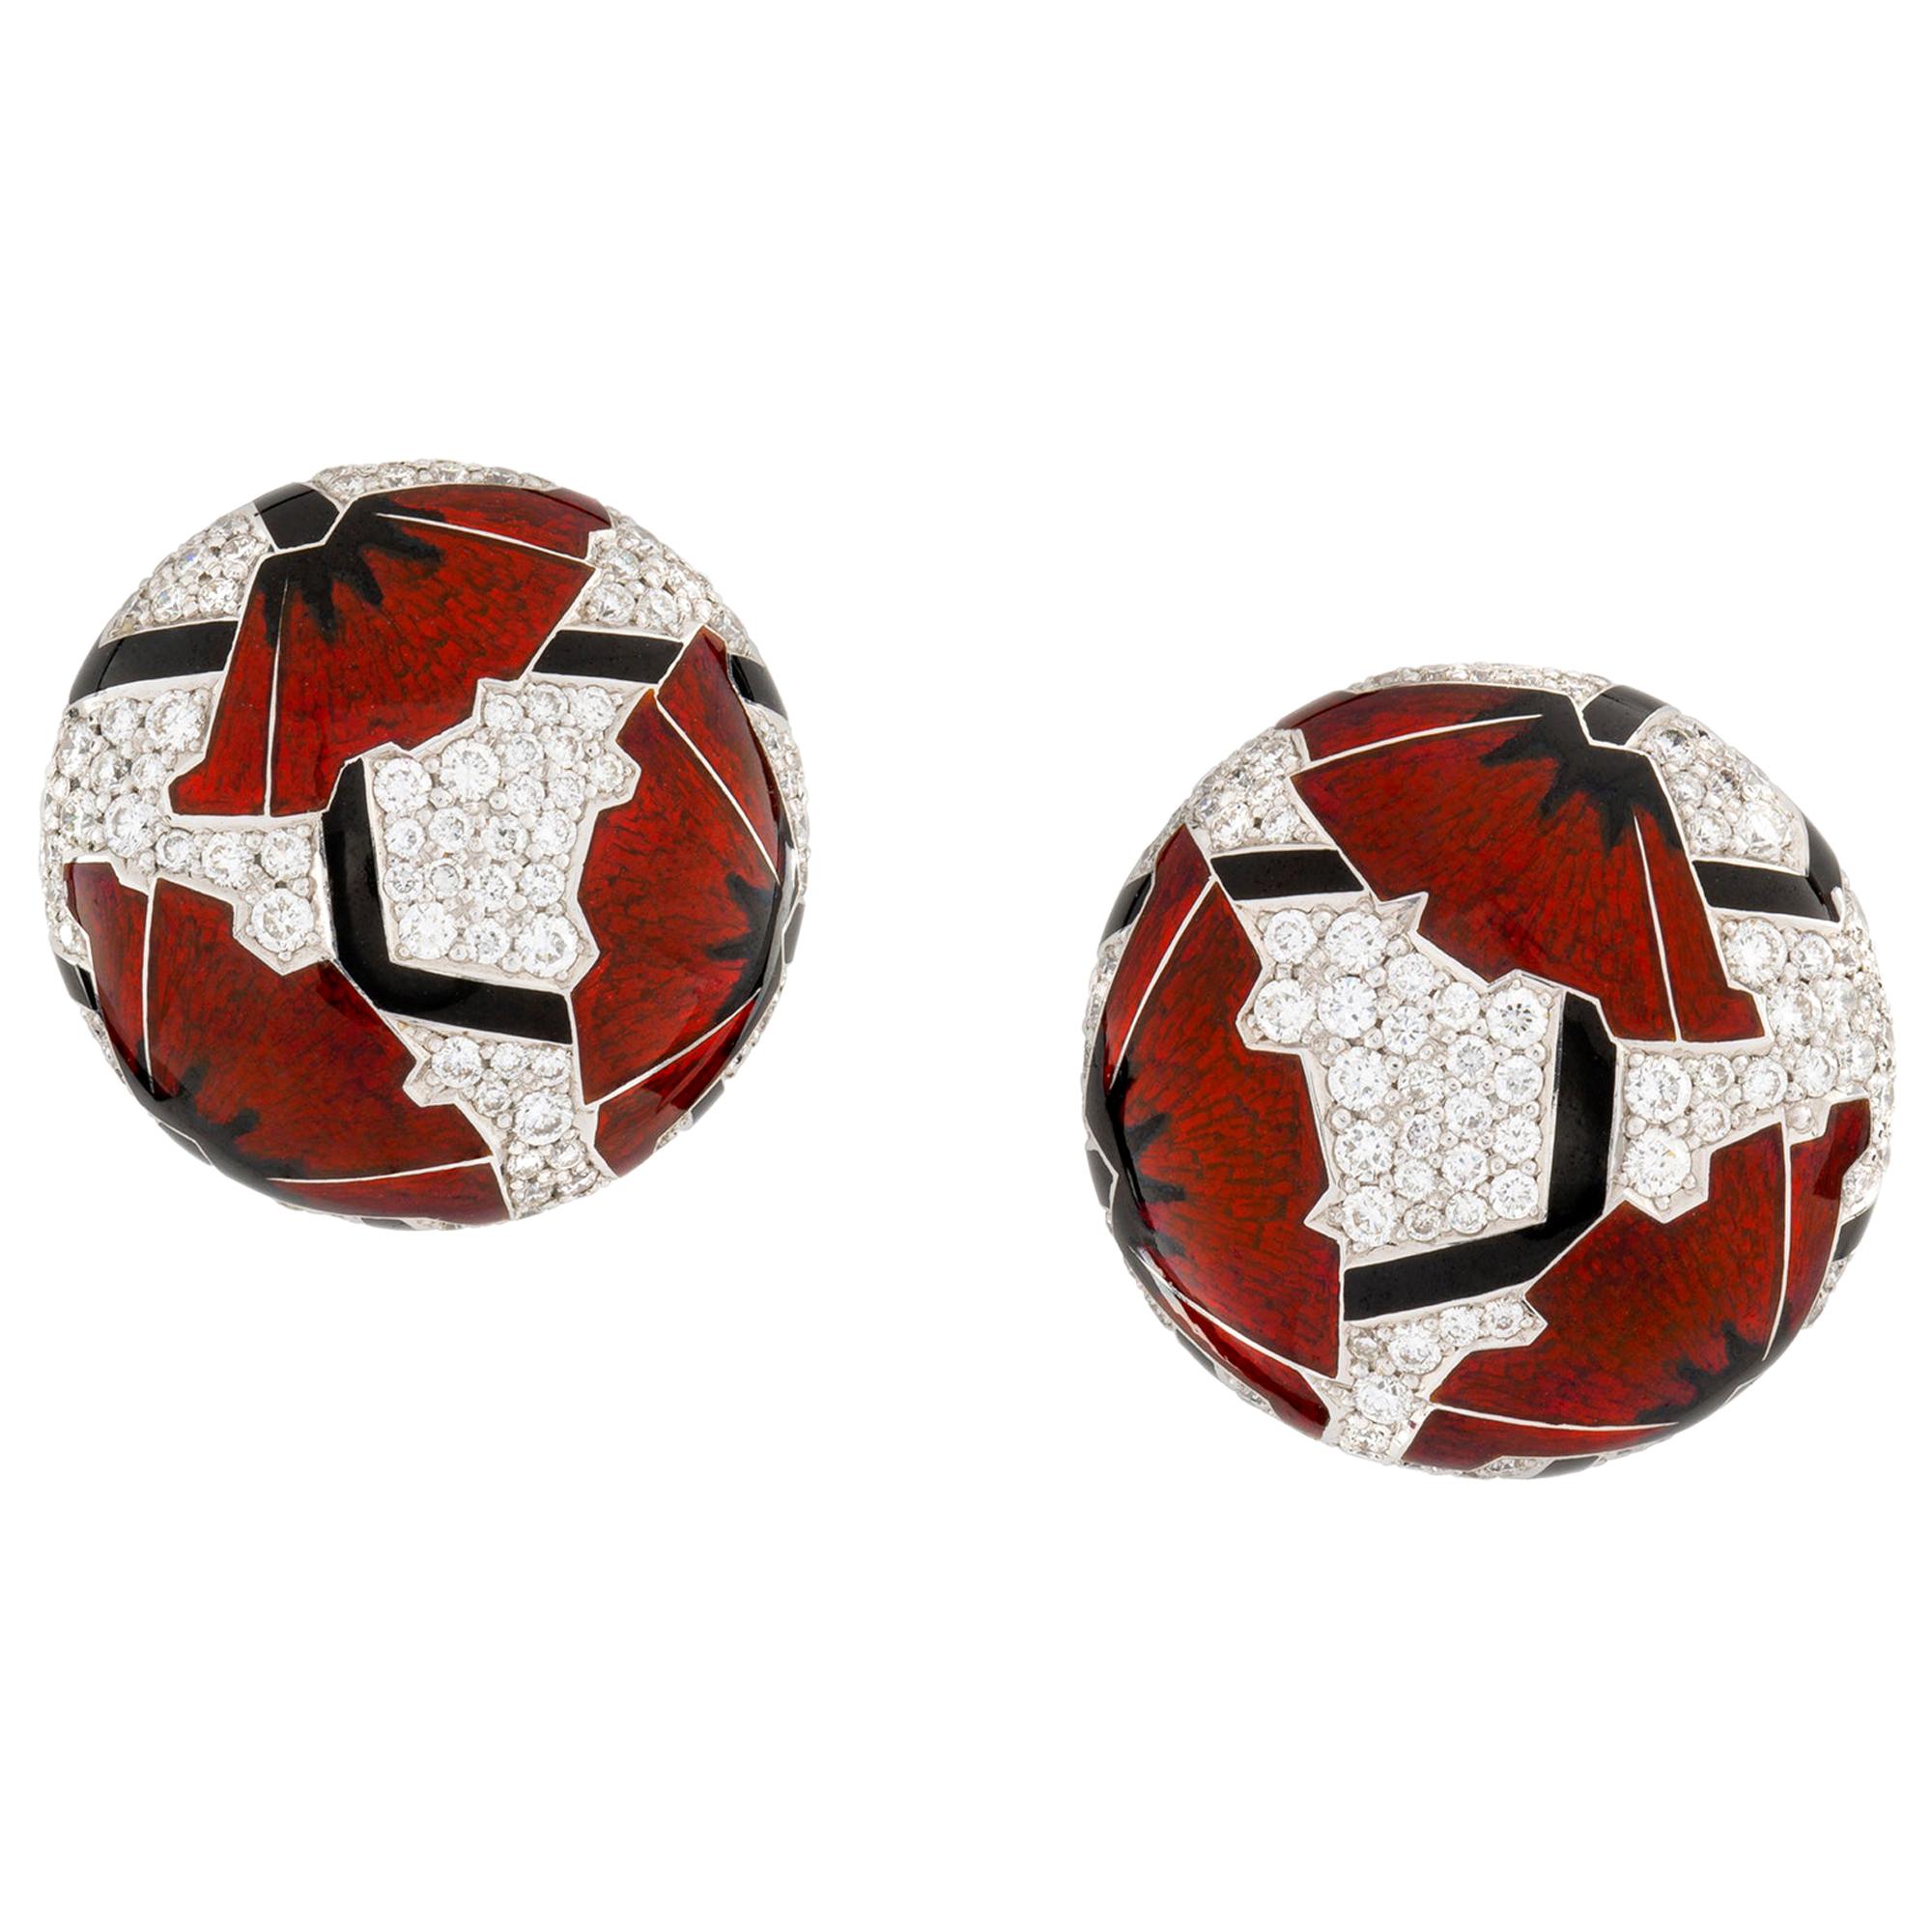 Pair of Red Poppies Art Deco Style Earrings by Ilgiz F